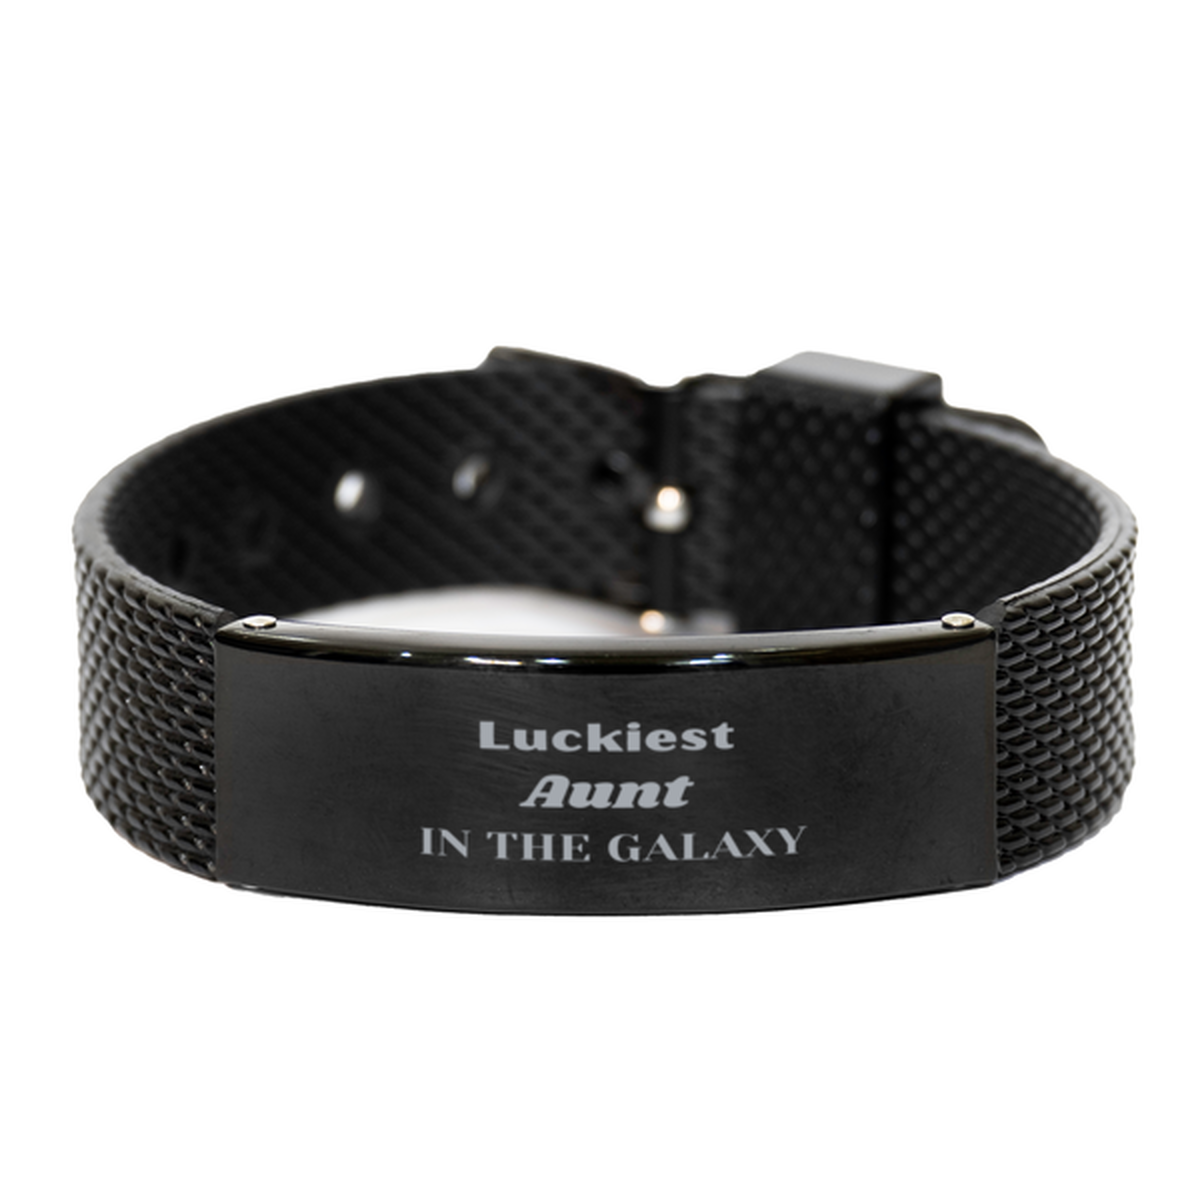 Luckiest Aunt in the Galaxy, To My Aunt Engraved Gifts, Christmas Aunt Black Shark Mesh Bracelet Gifts, X-mas Birthday Unique Gifts For Aunt Men Women